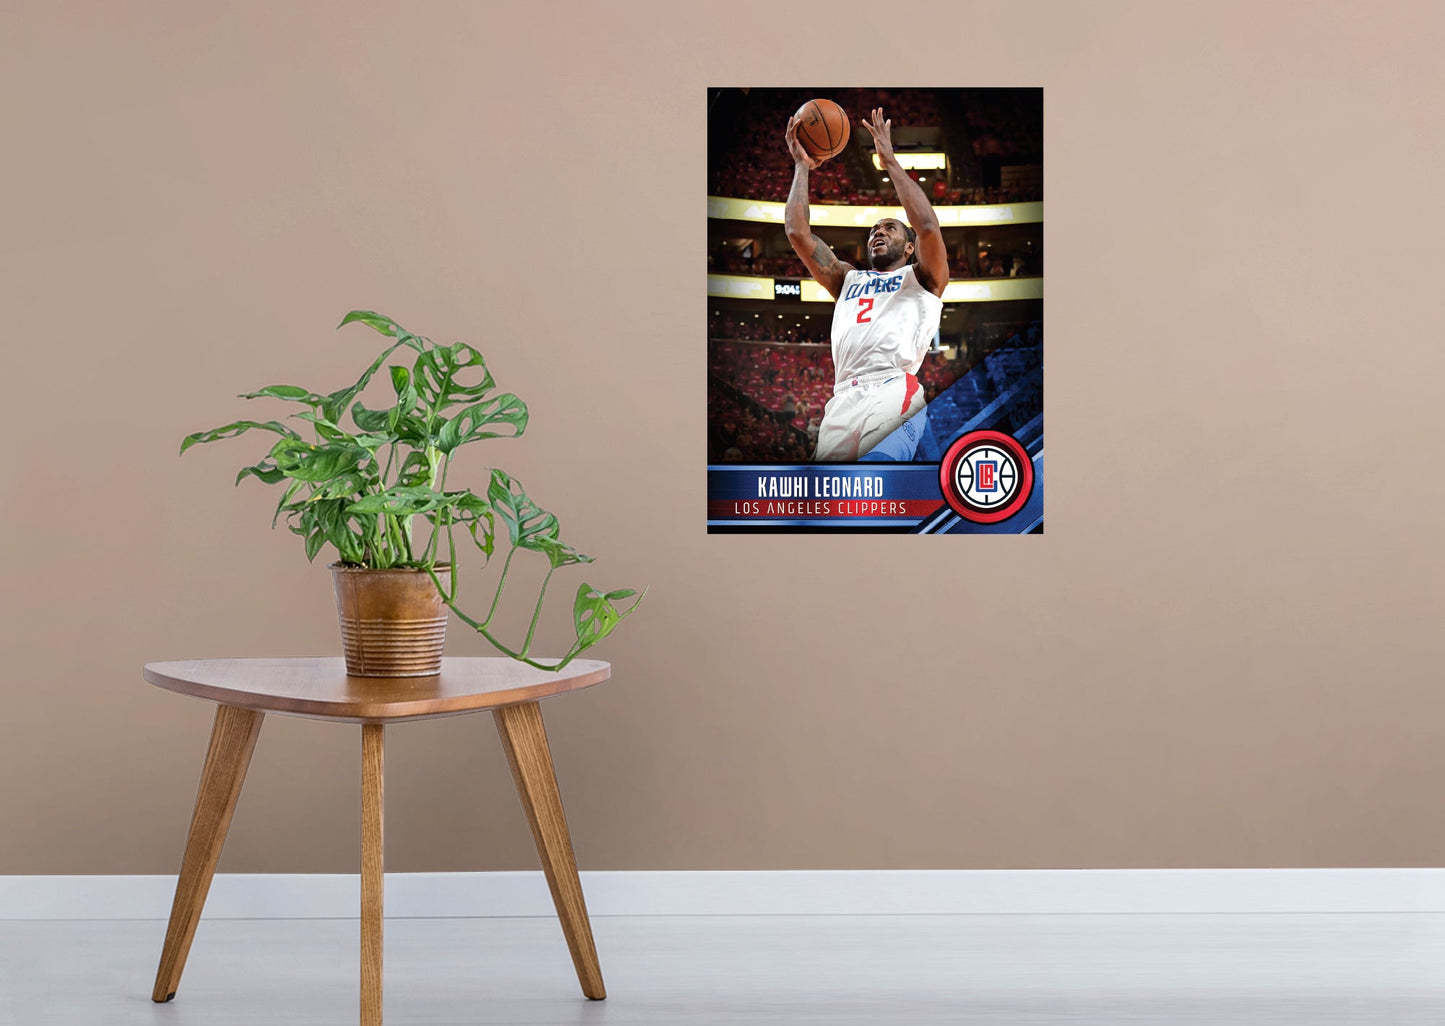 Los Angeles Clippers: Kawhi Leonard Poster - Officially Licensed NBA Removable Adhesive Decal